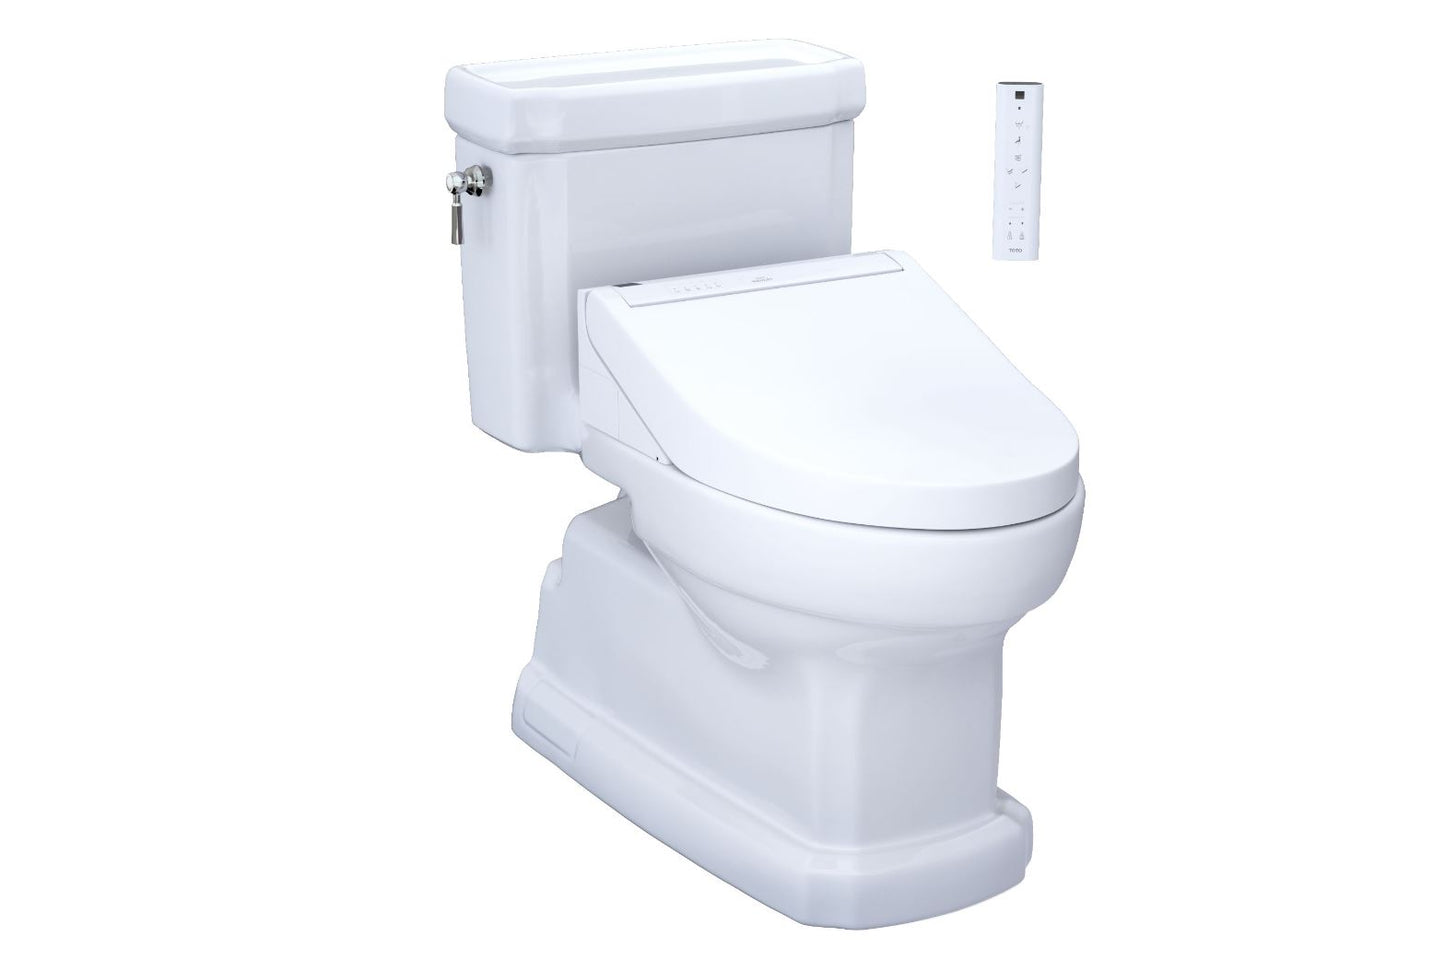 Toto Guinevere One-piece Toilet With C5 Washlet Bidet Seat - 1.28 GPF